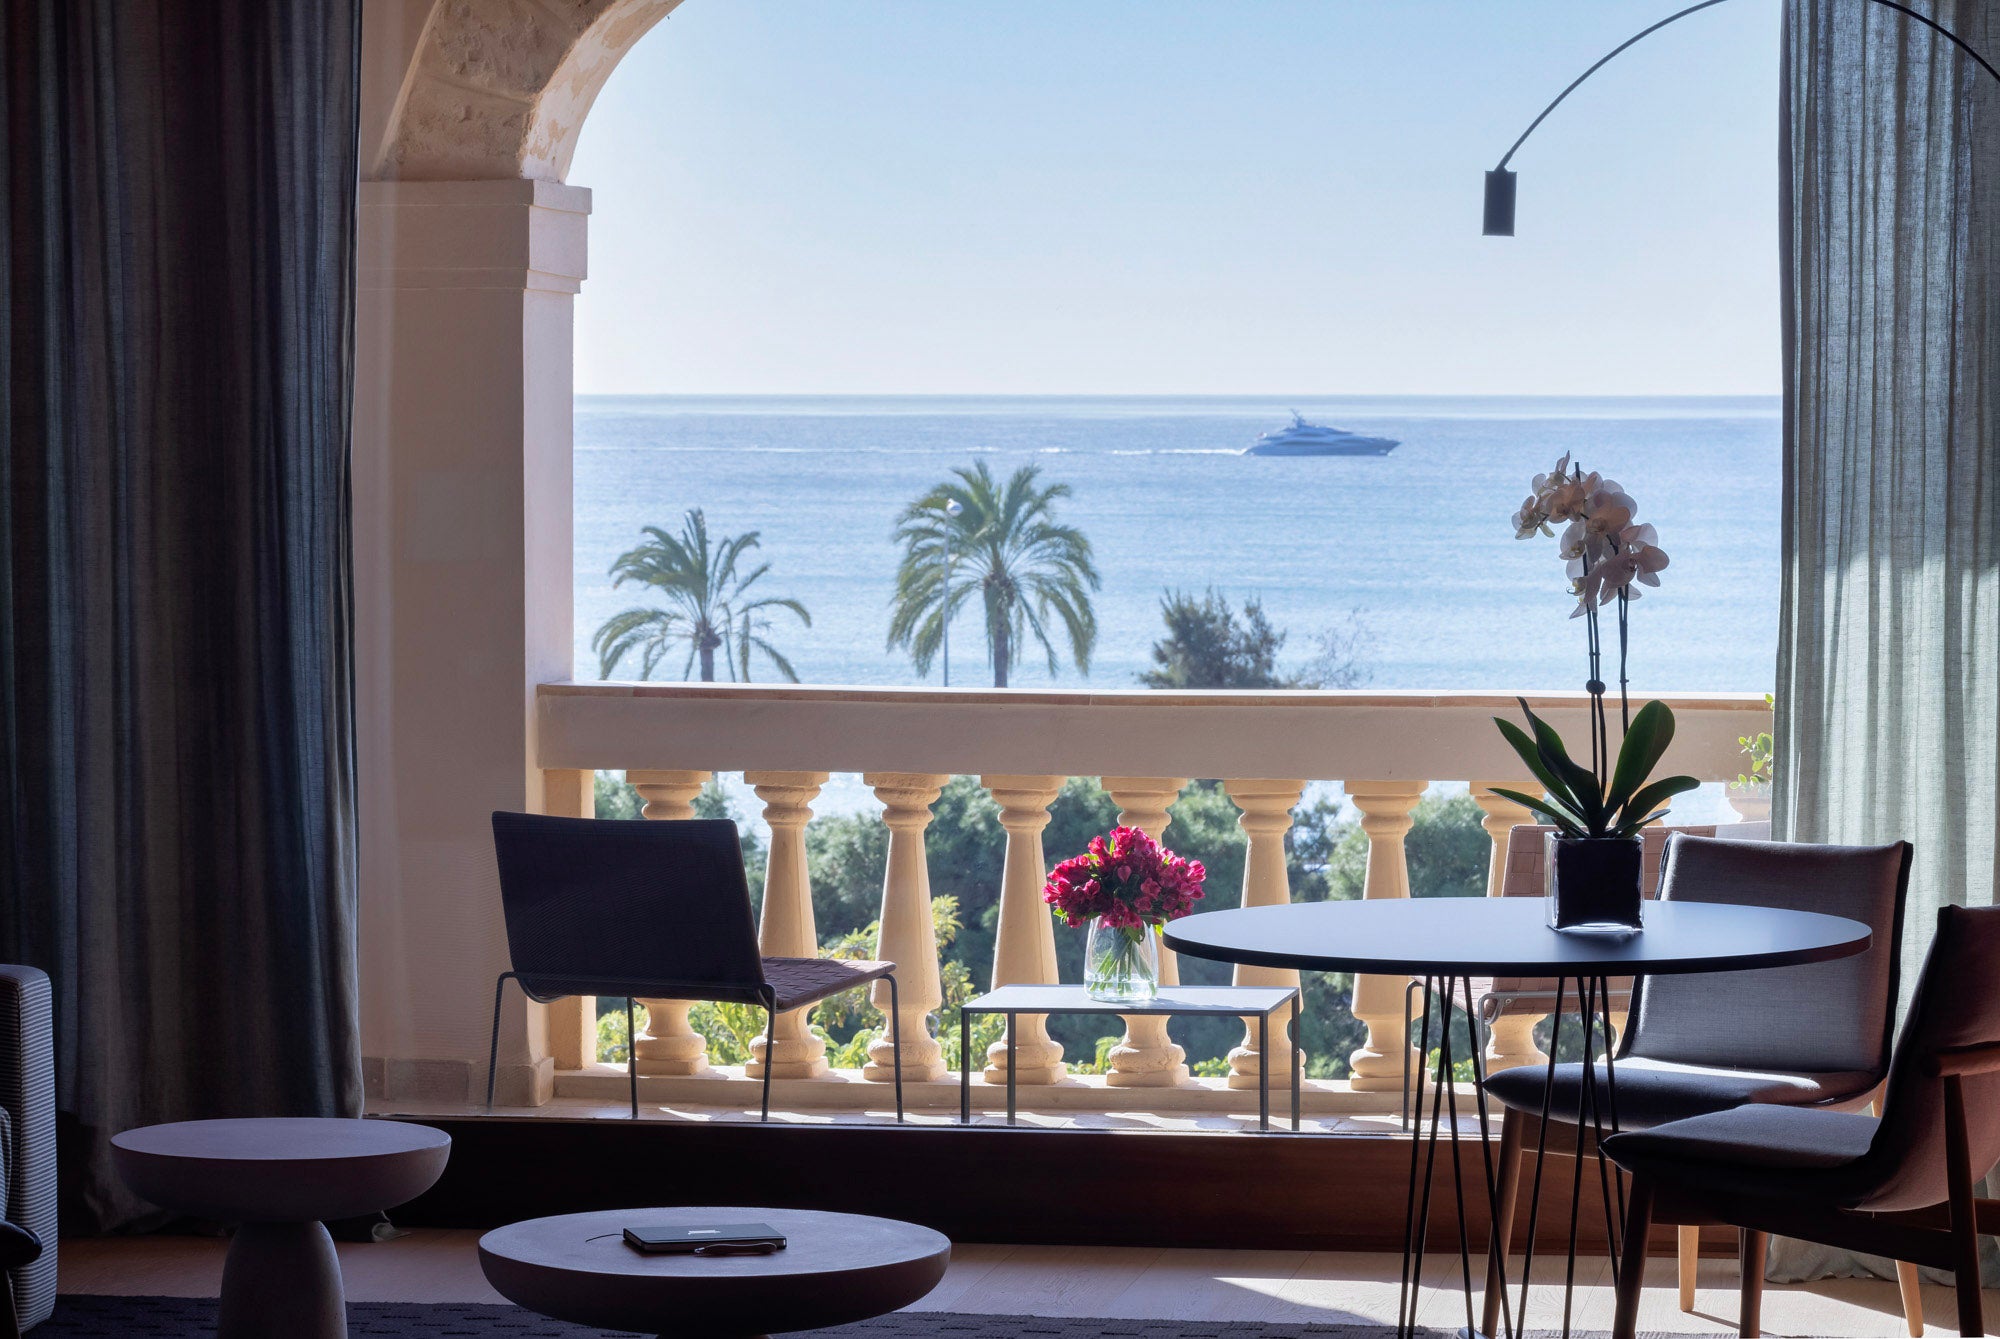 ‘Each hotel has been a labour of love,’ says It Mallorca’s founder, Miguel Conde